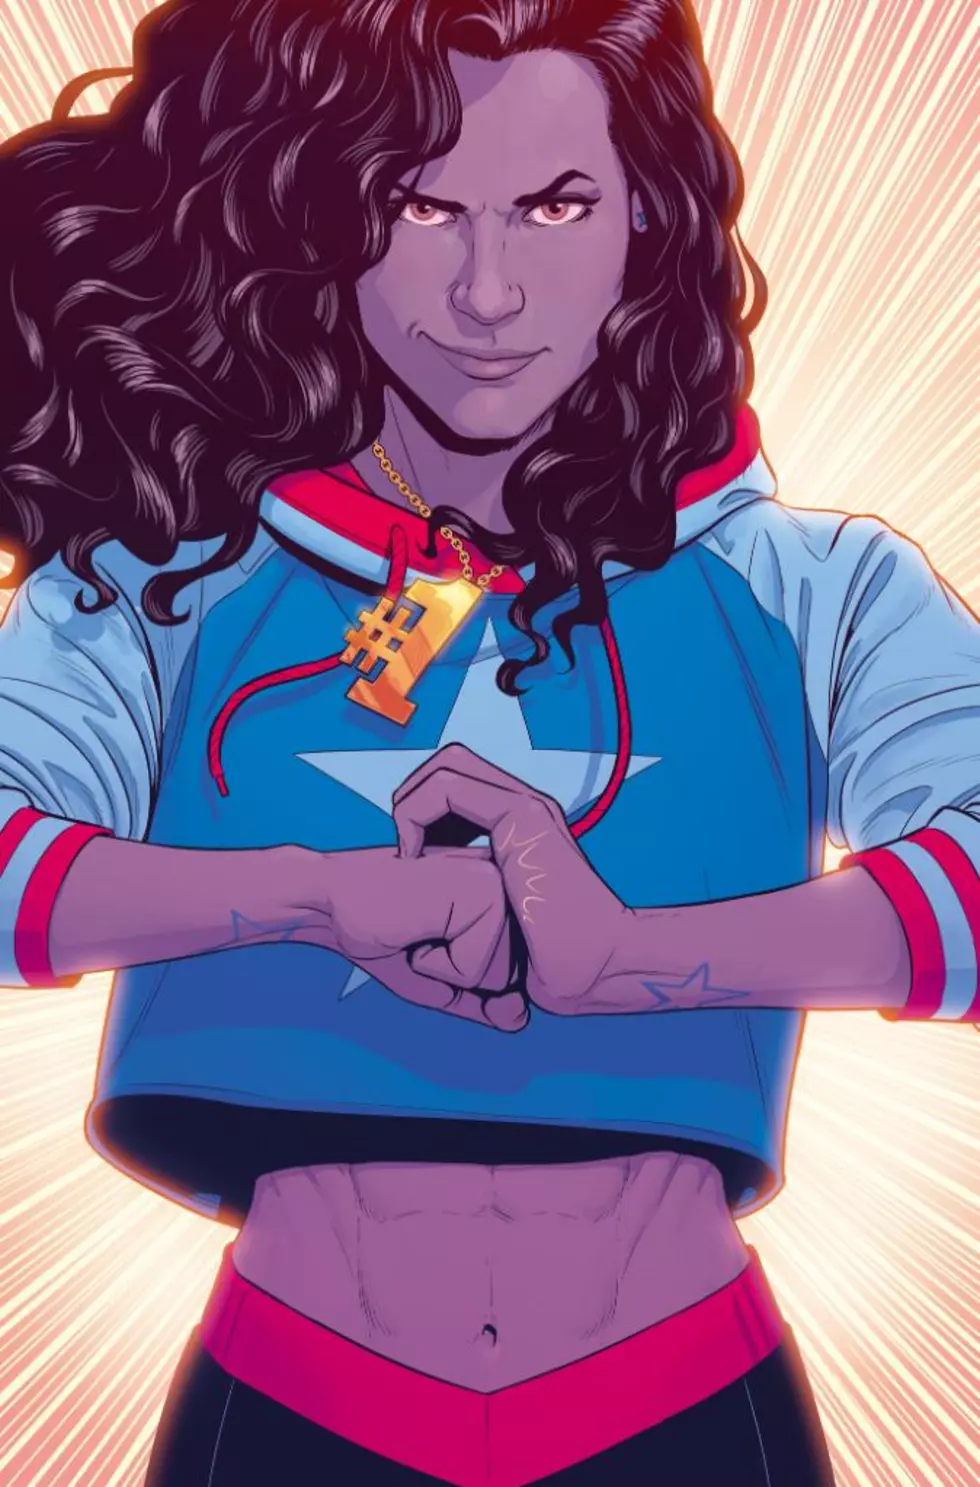 Marvel Comics Finally Announces A Ms. America Ongoing Comic [NYCC 2016]